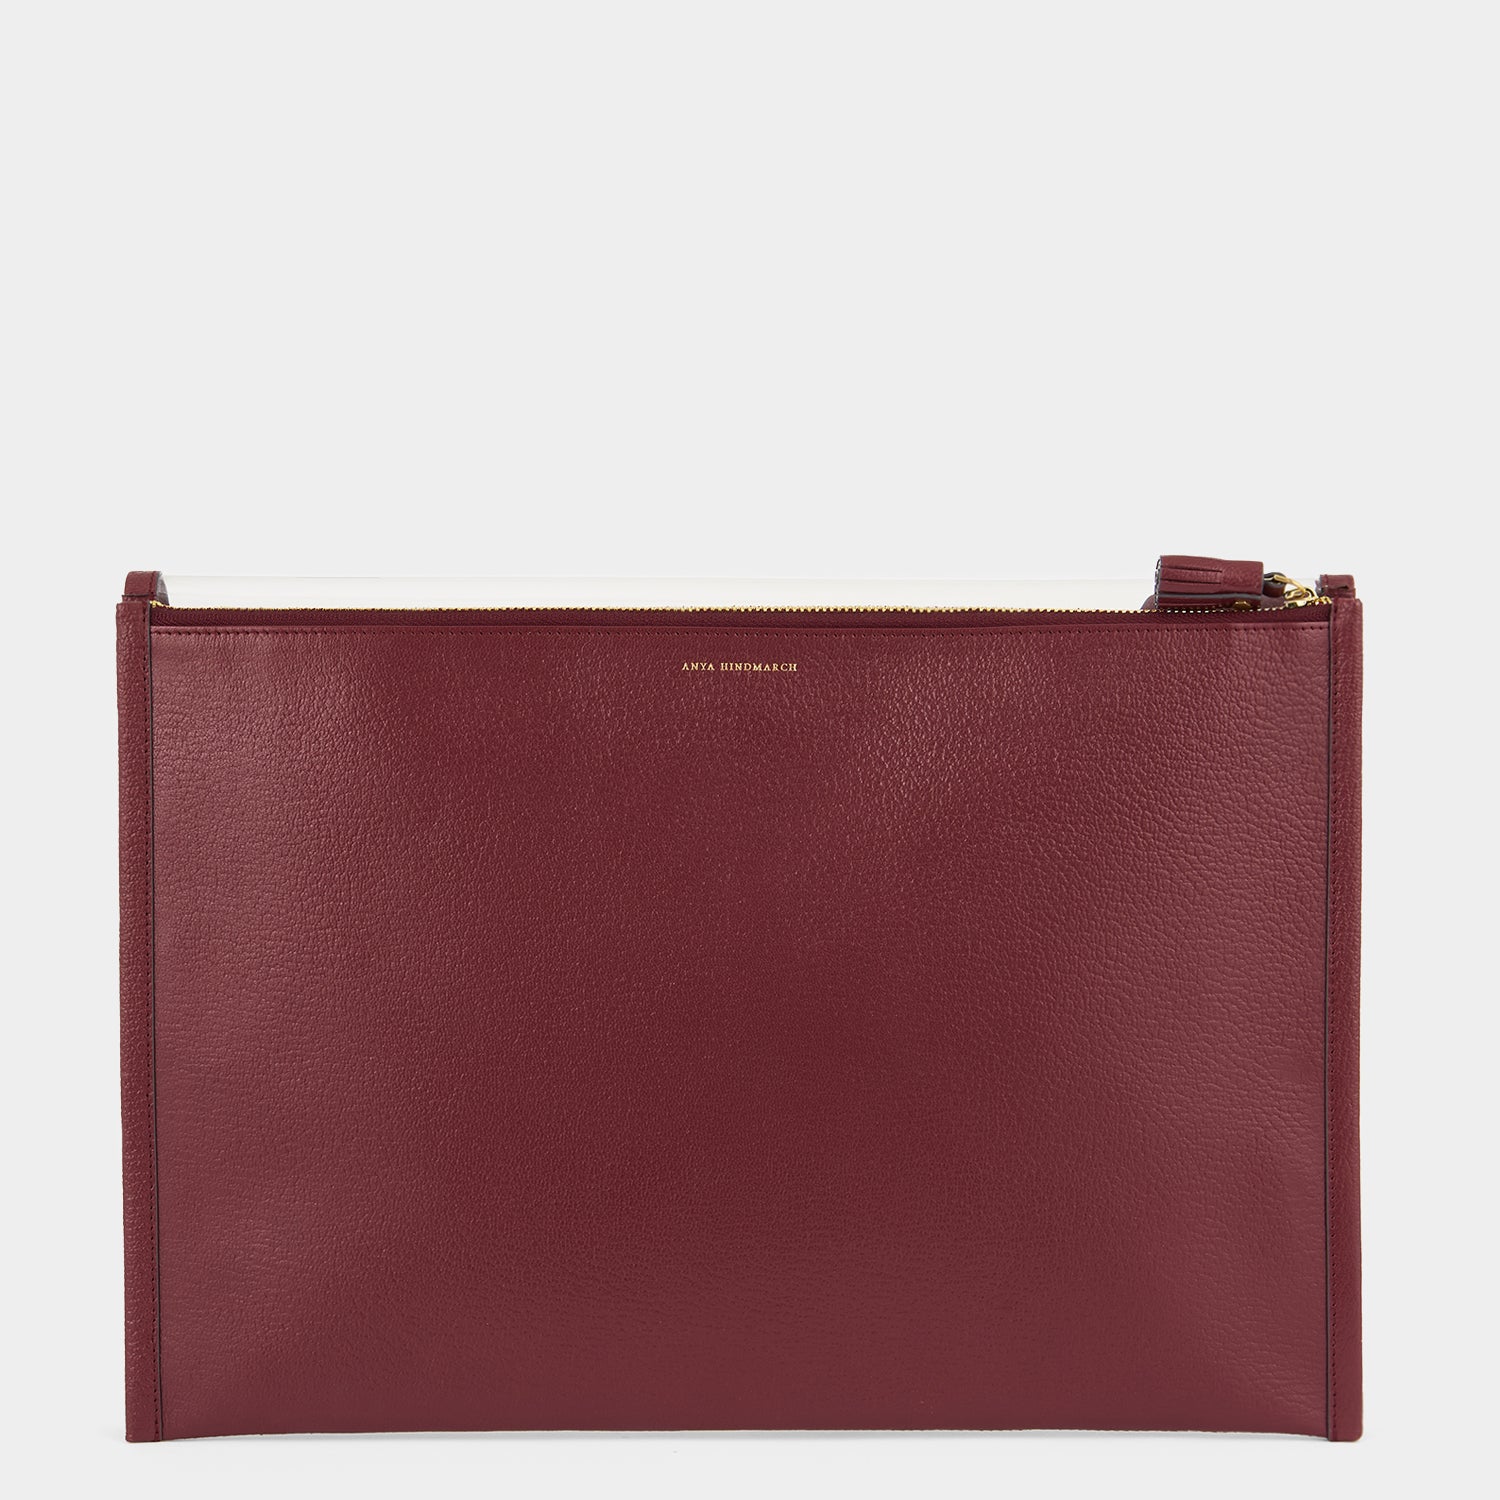 Documents Envelope -

                  
                    Capra Leather in Medium Red/Clear -
                  

                  Anya Hindmarch UK
